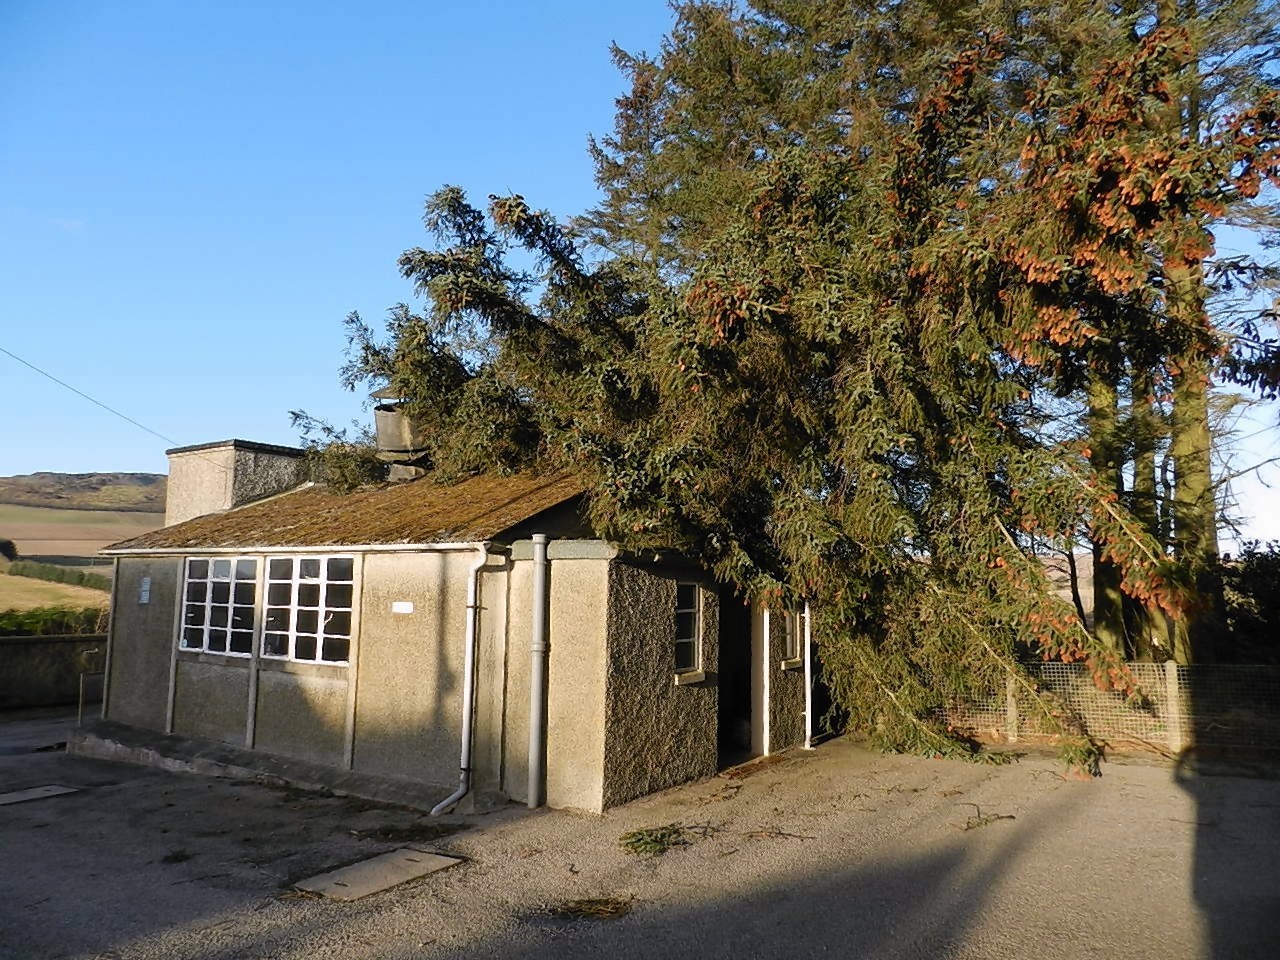 Fisherford School was damaged last year when a tree fell on top of its dining hall.